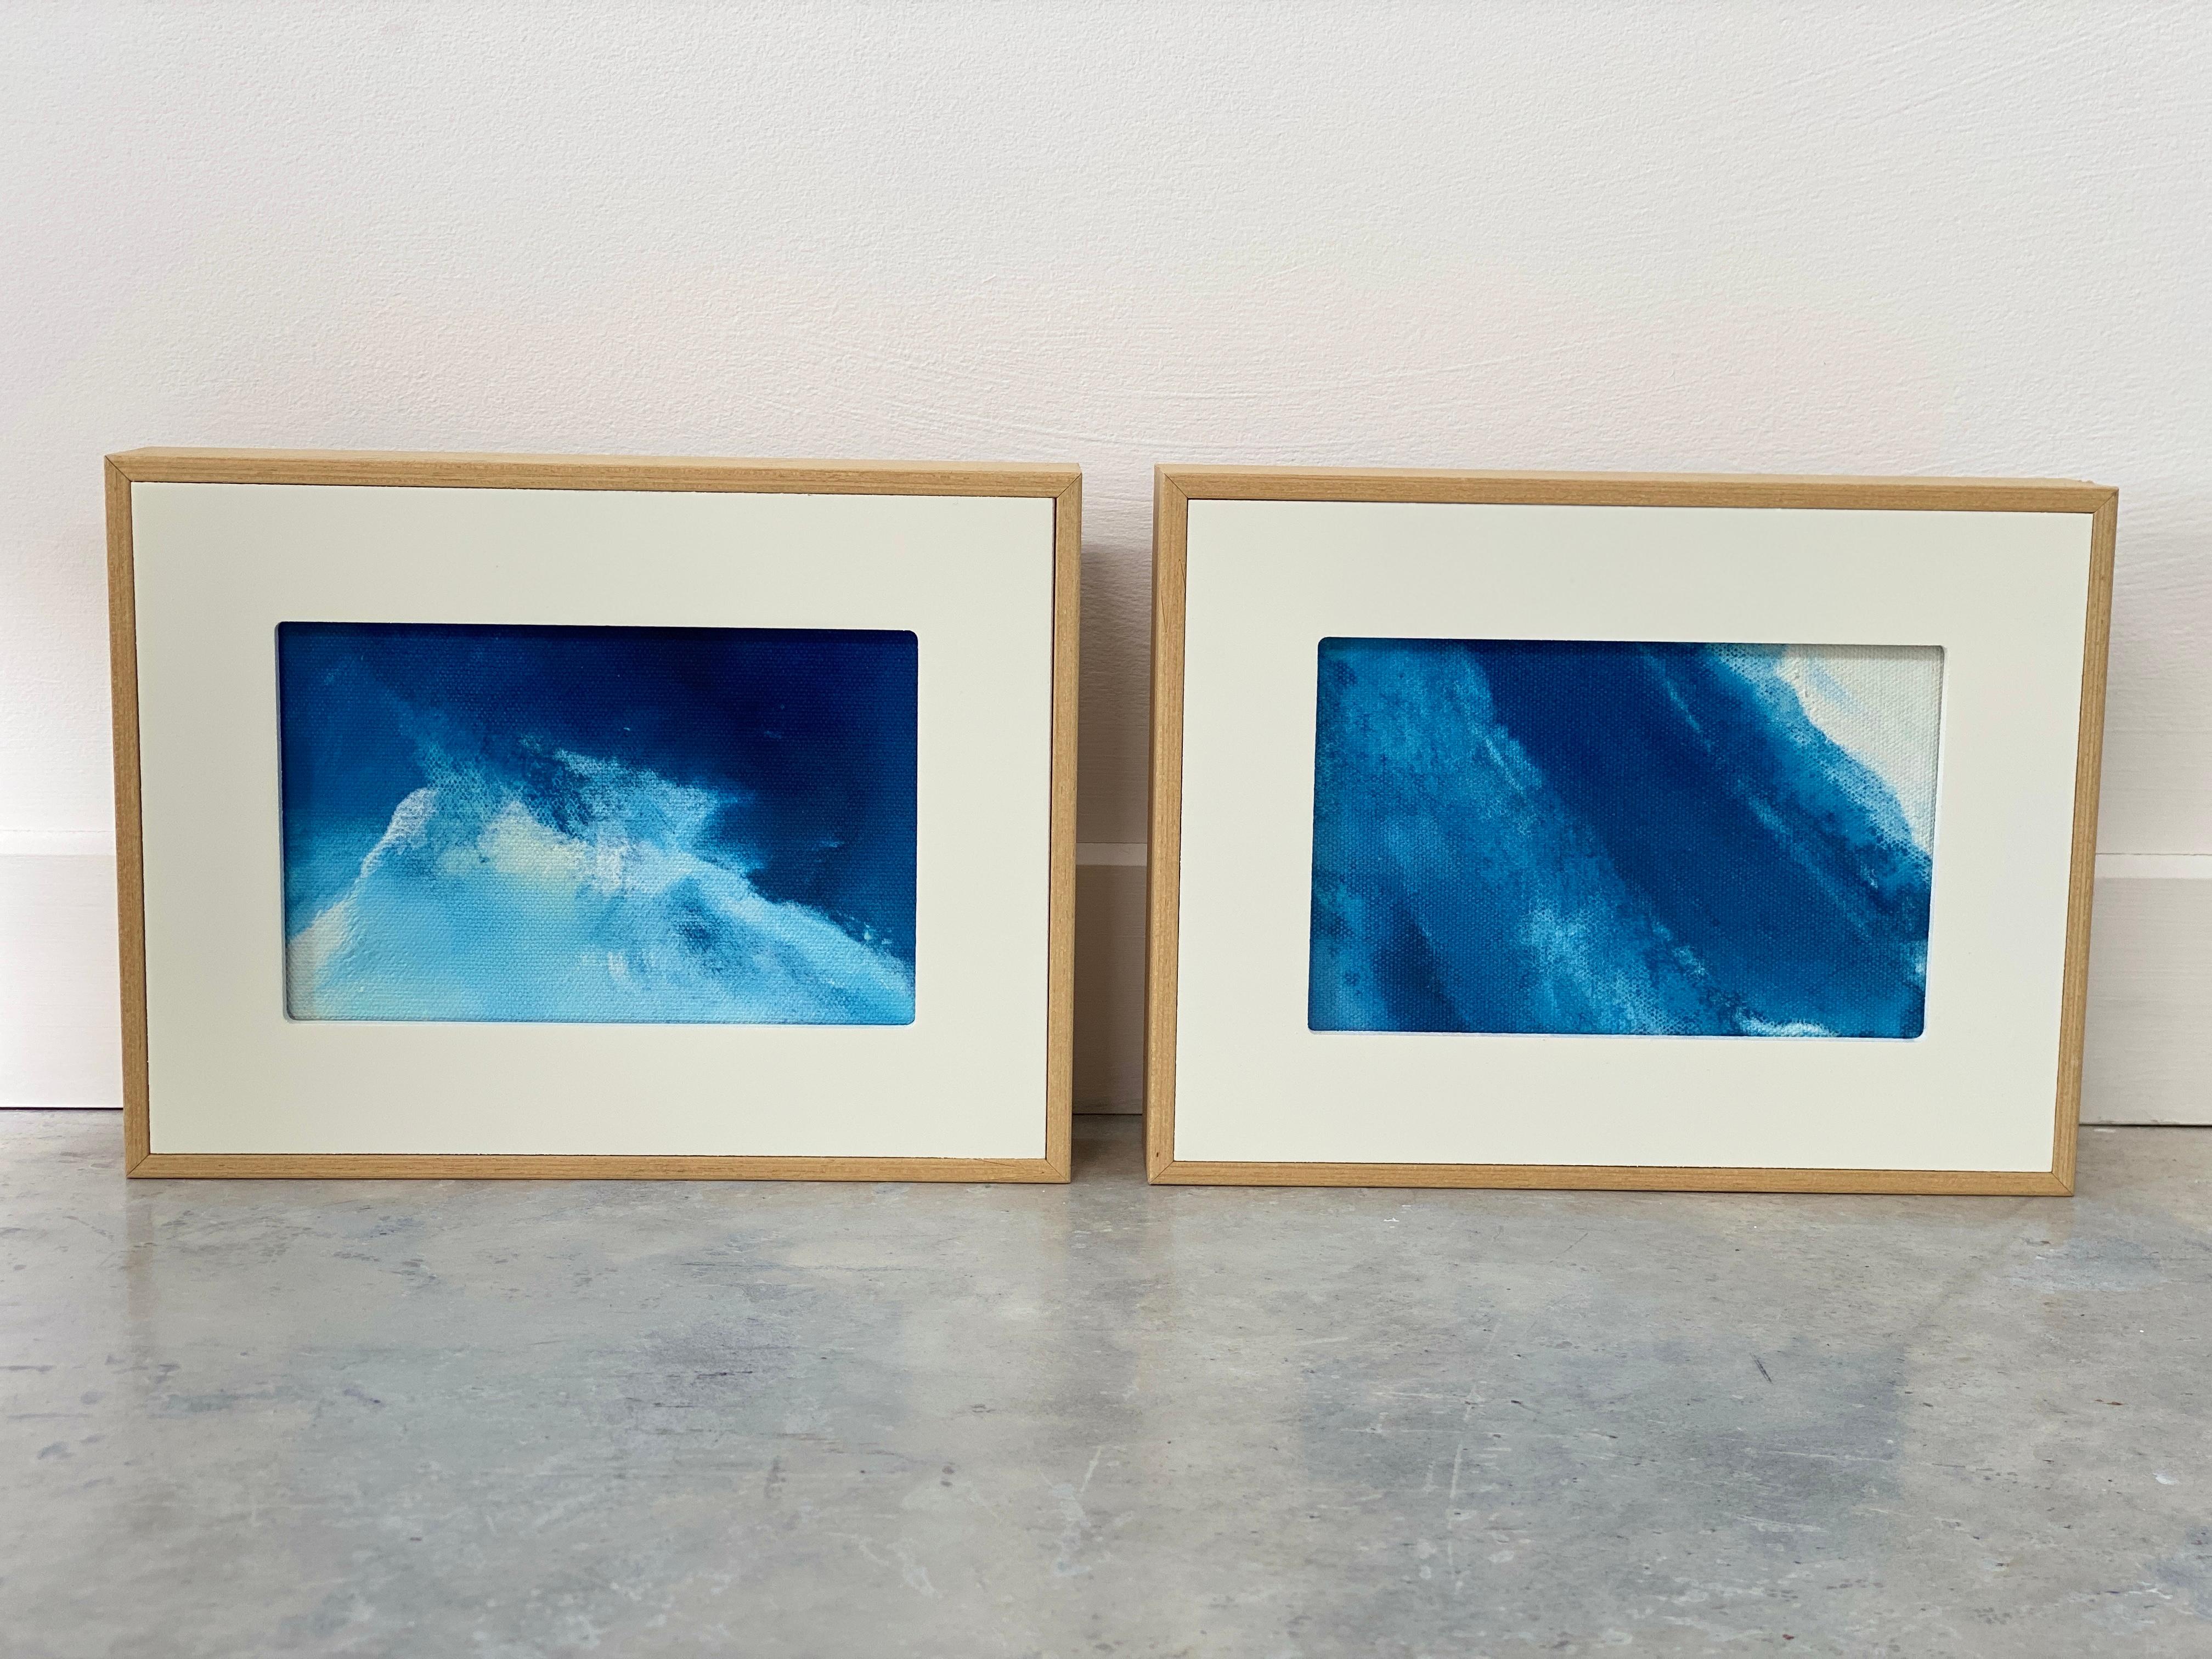 'Gentle Blends Blue Set' 2 small original paintings, quality framed, minimalist abstracts on canvas. Lighten up the room with bright, summer classic colours of blue and white. Enjoy the calming, uplifting energy each time you view these happy little